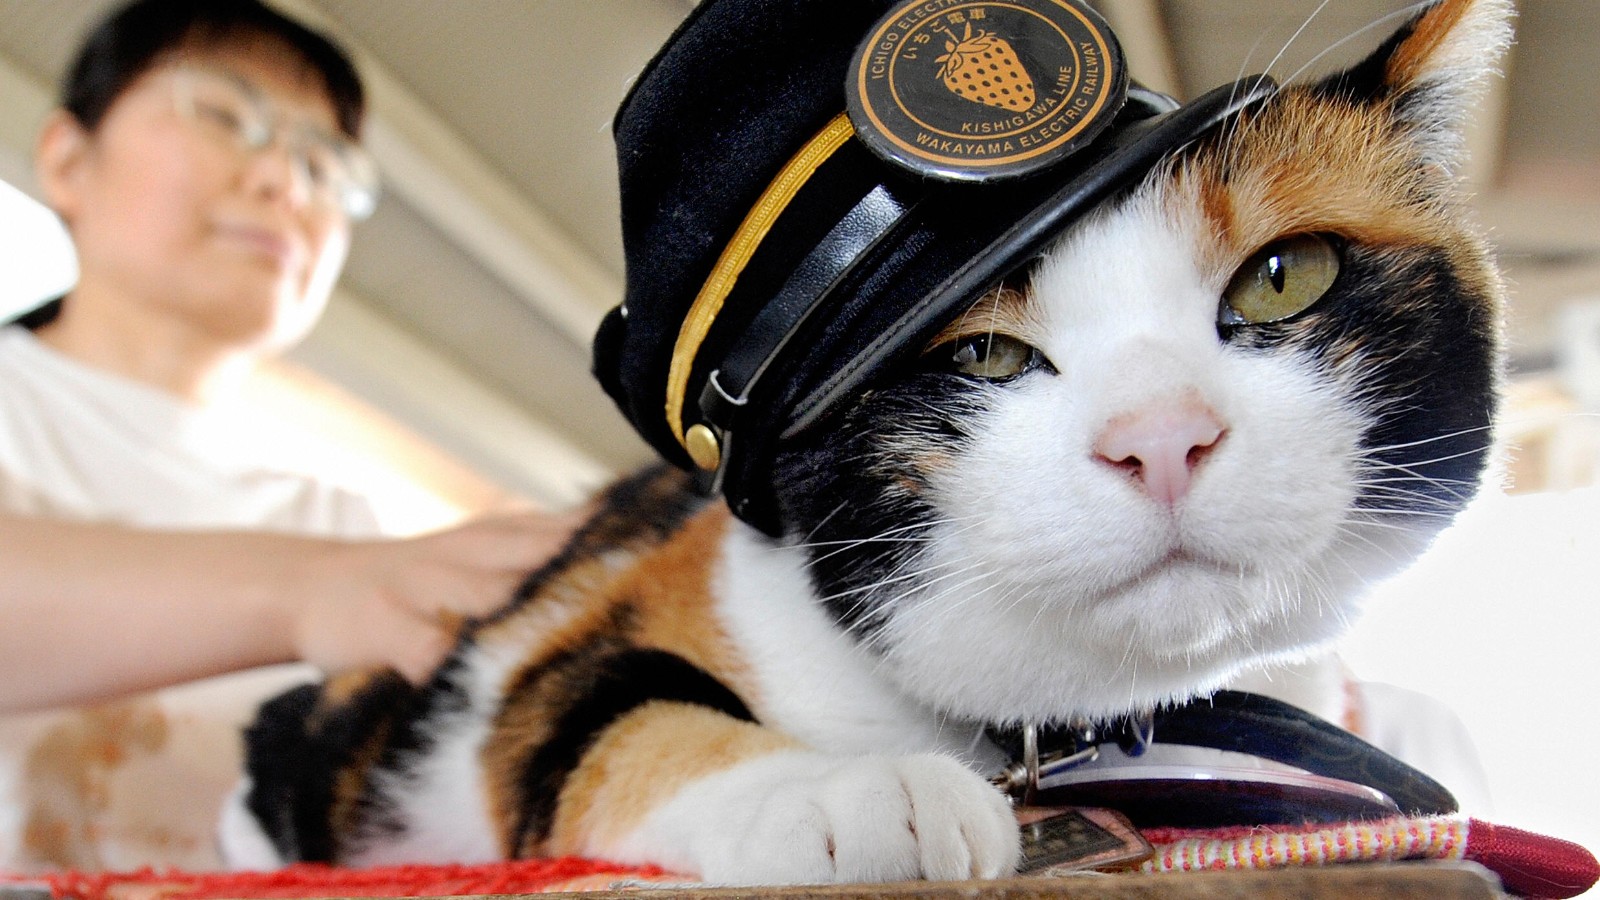 Tama the cat, Japan's cutest stationmaster, has died | CNN Travel